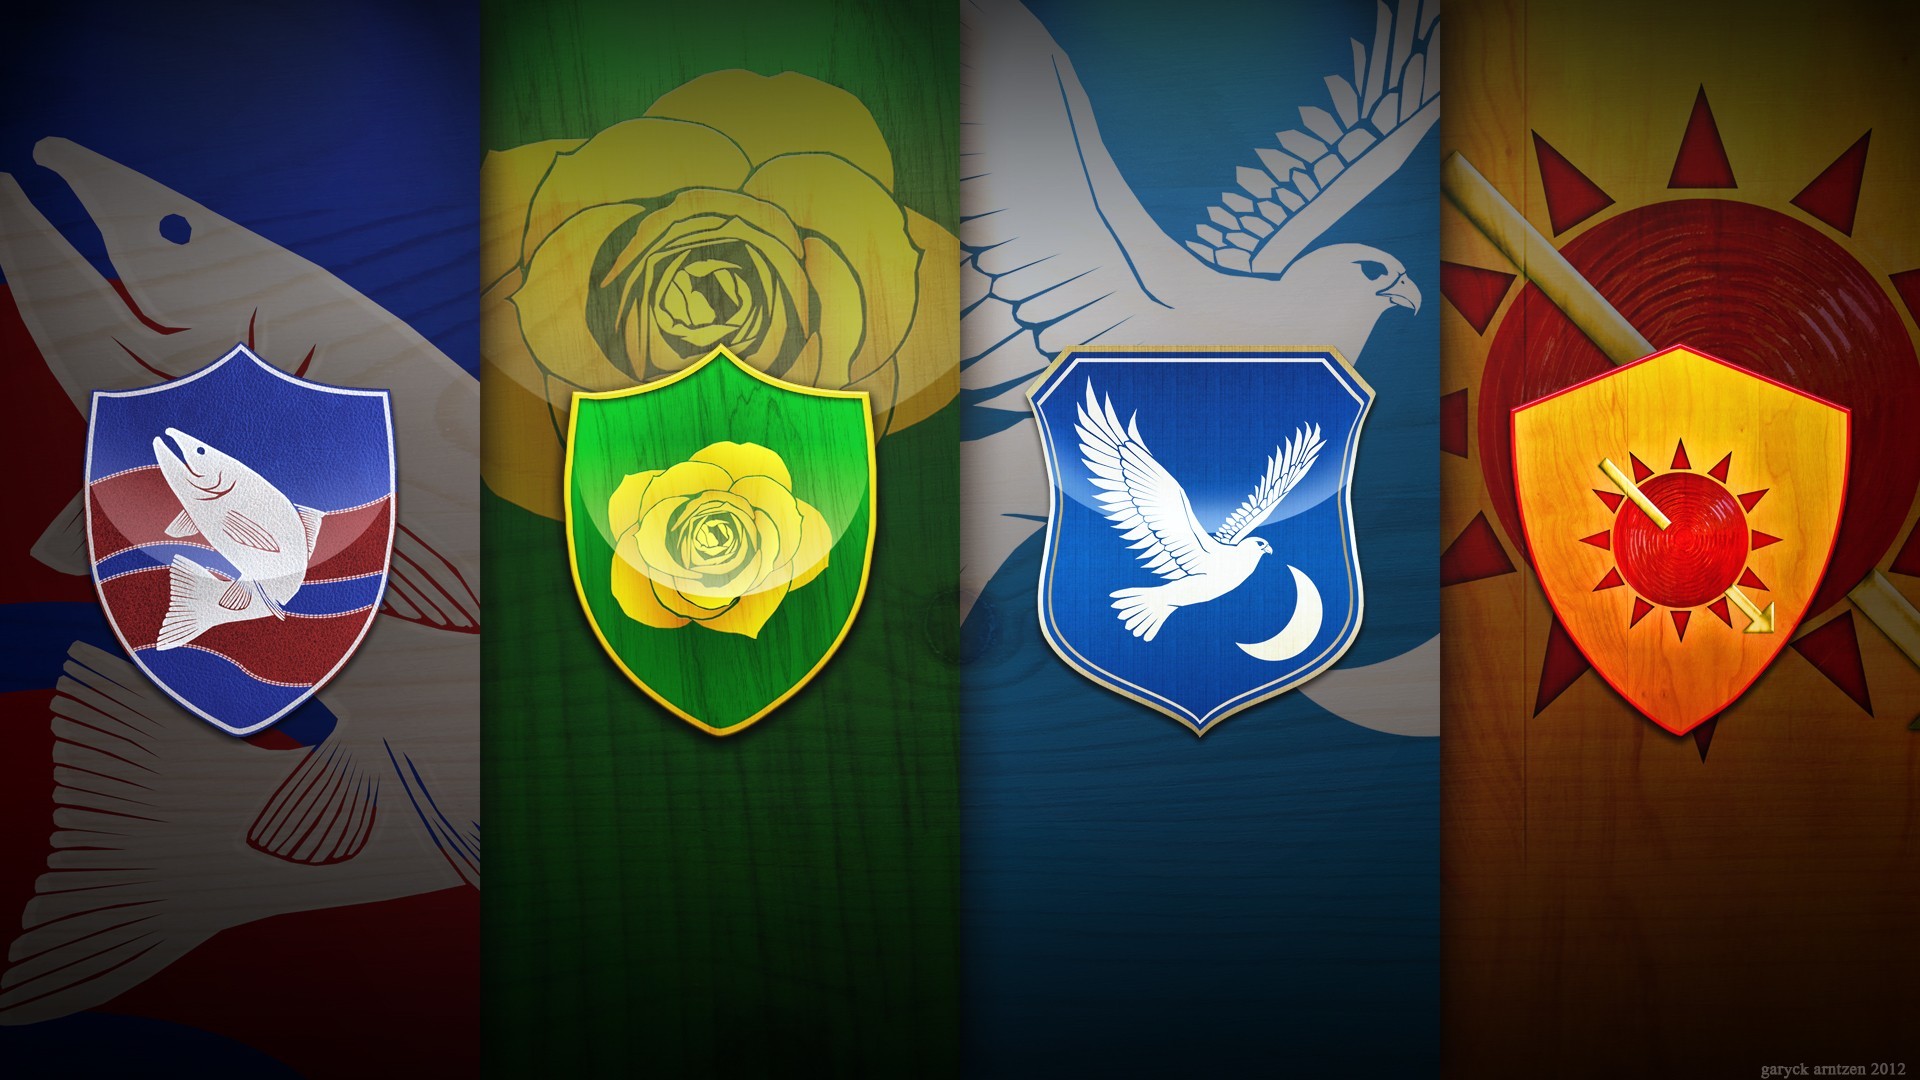 Game of Thrones Wallpapers :: houses, Game of Thrones, Noble, westeros,  House